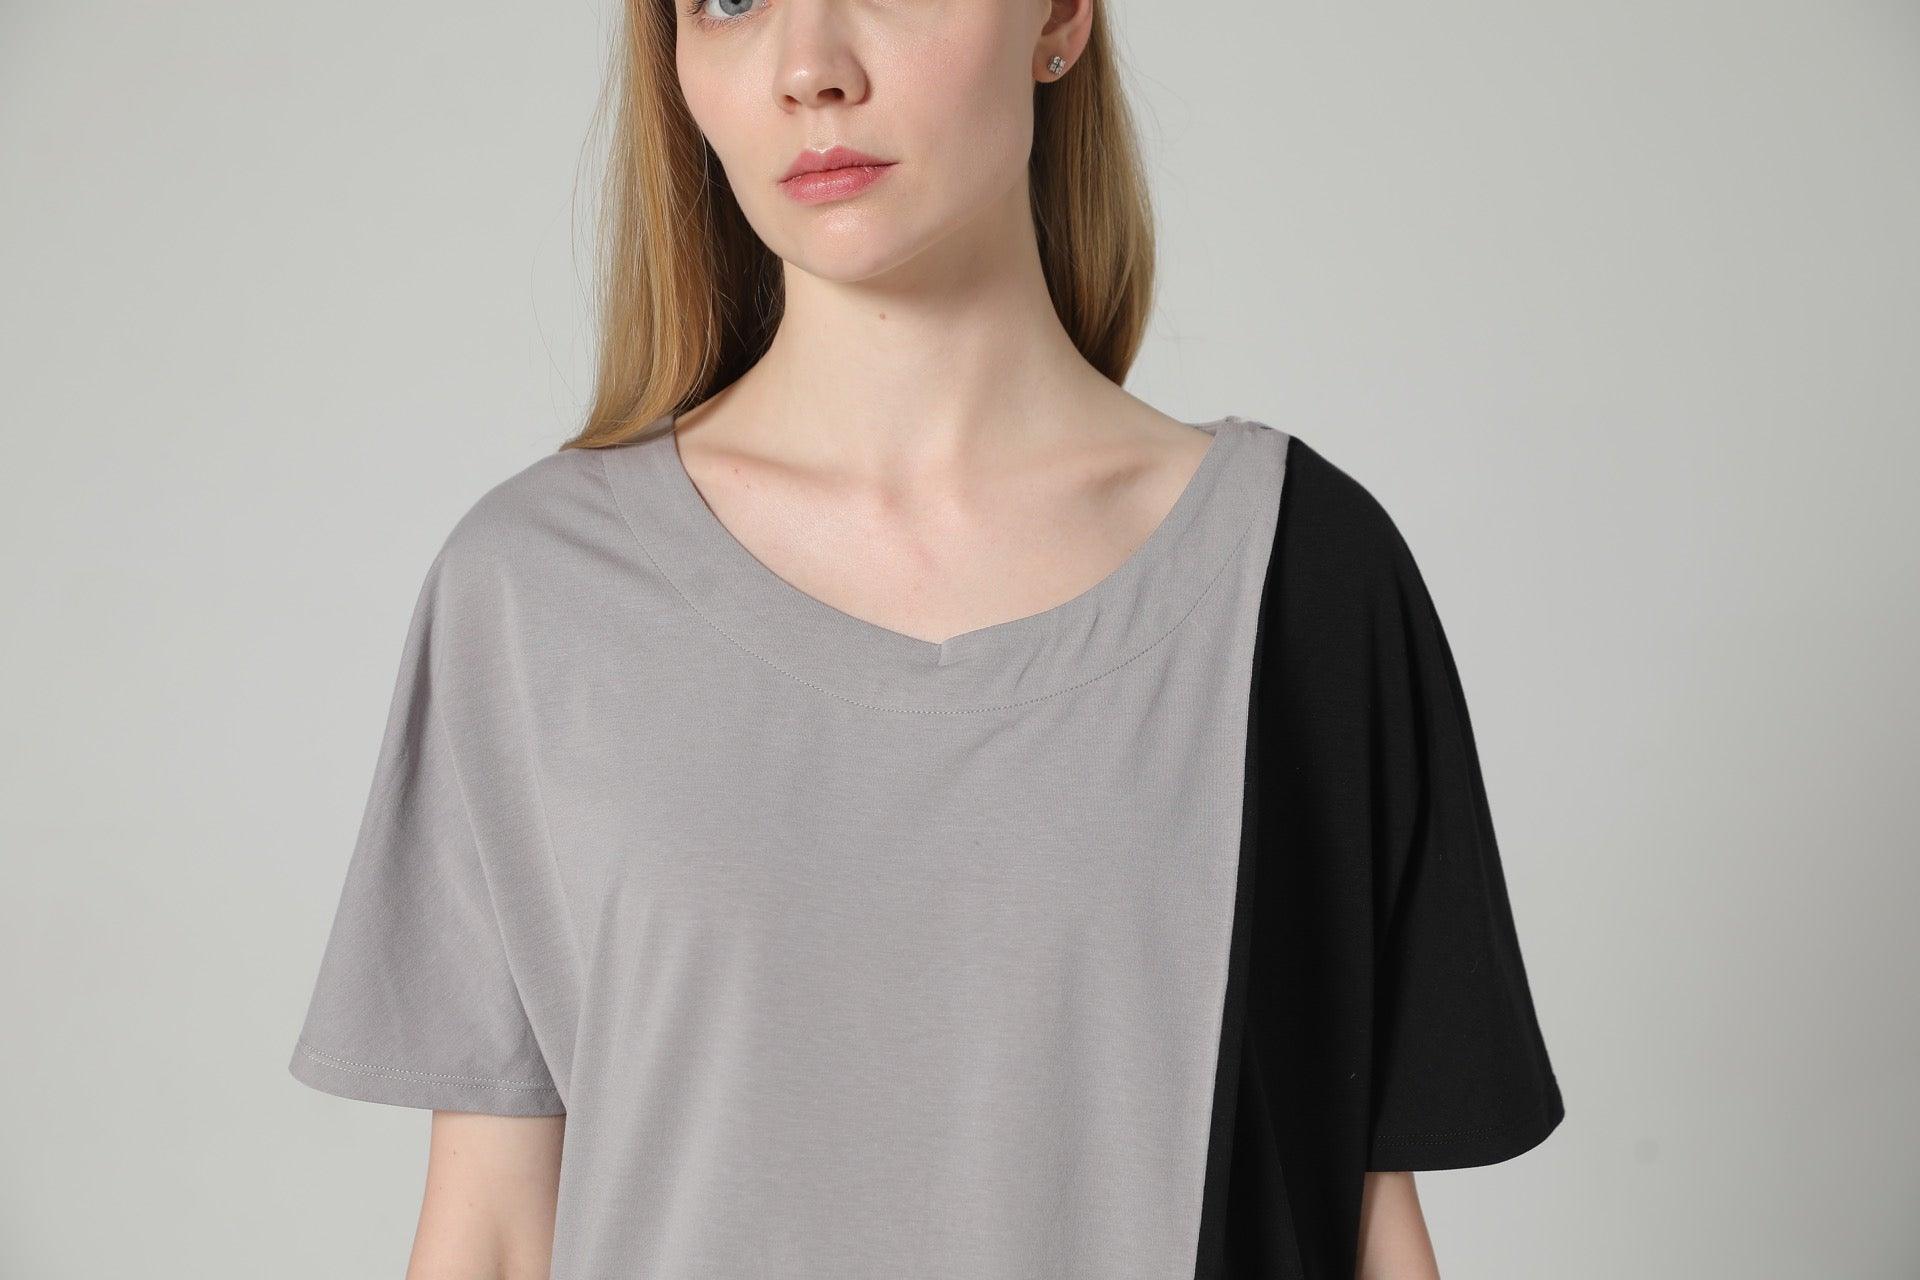 Women's Two Tone Short Sleeve Top - NOT LABELED